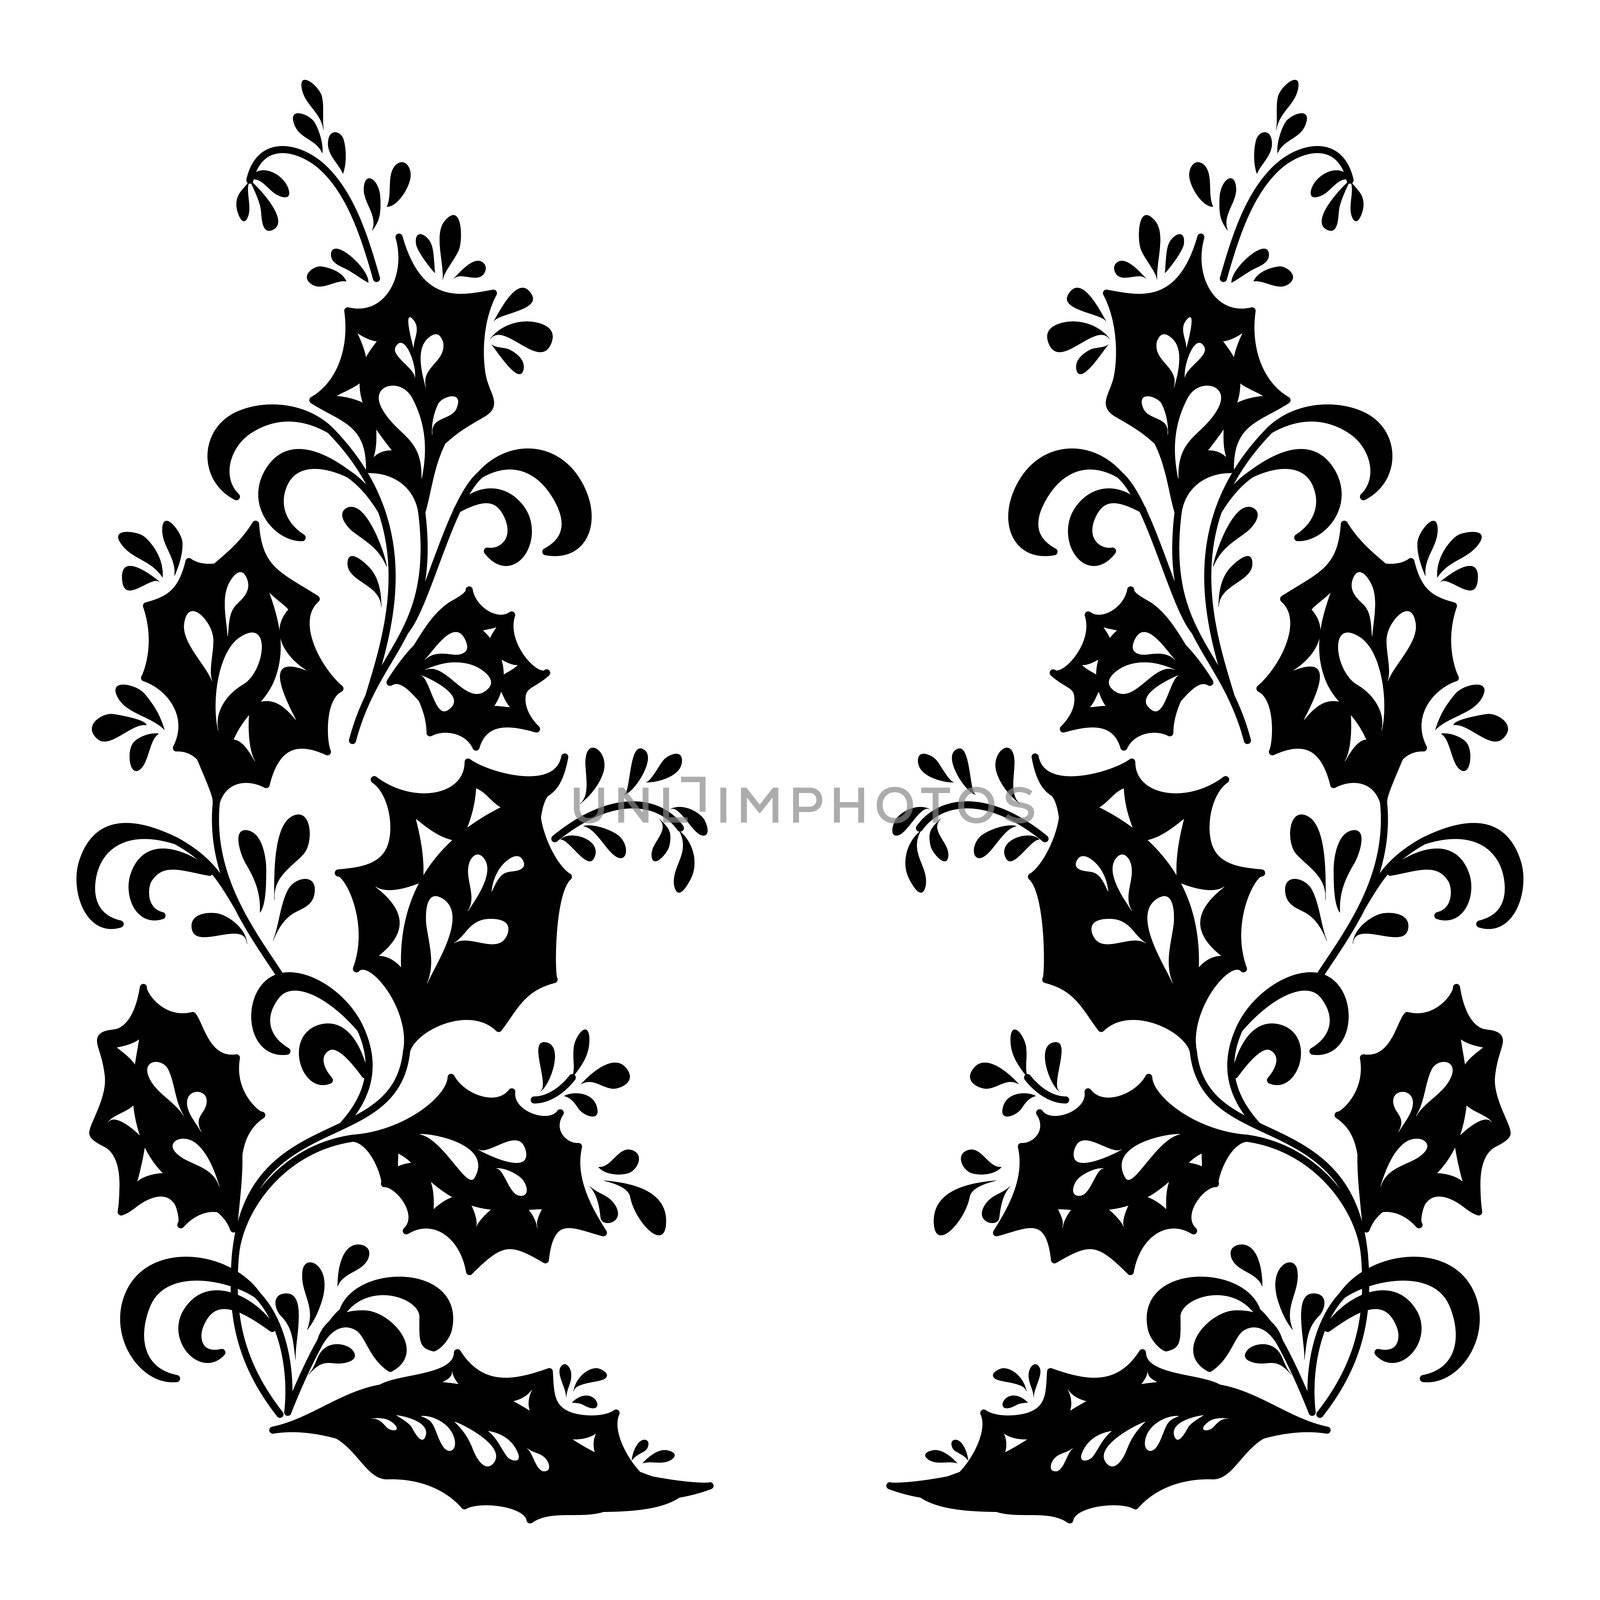 Abstract floral background, symbolical flowers, black silhouette on white